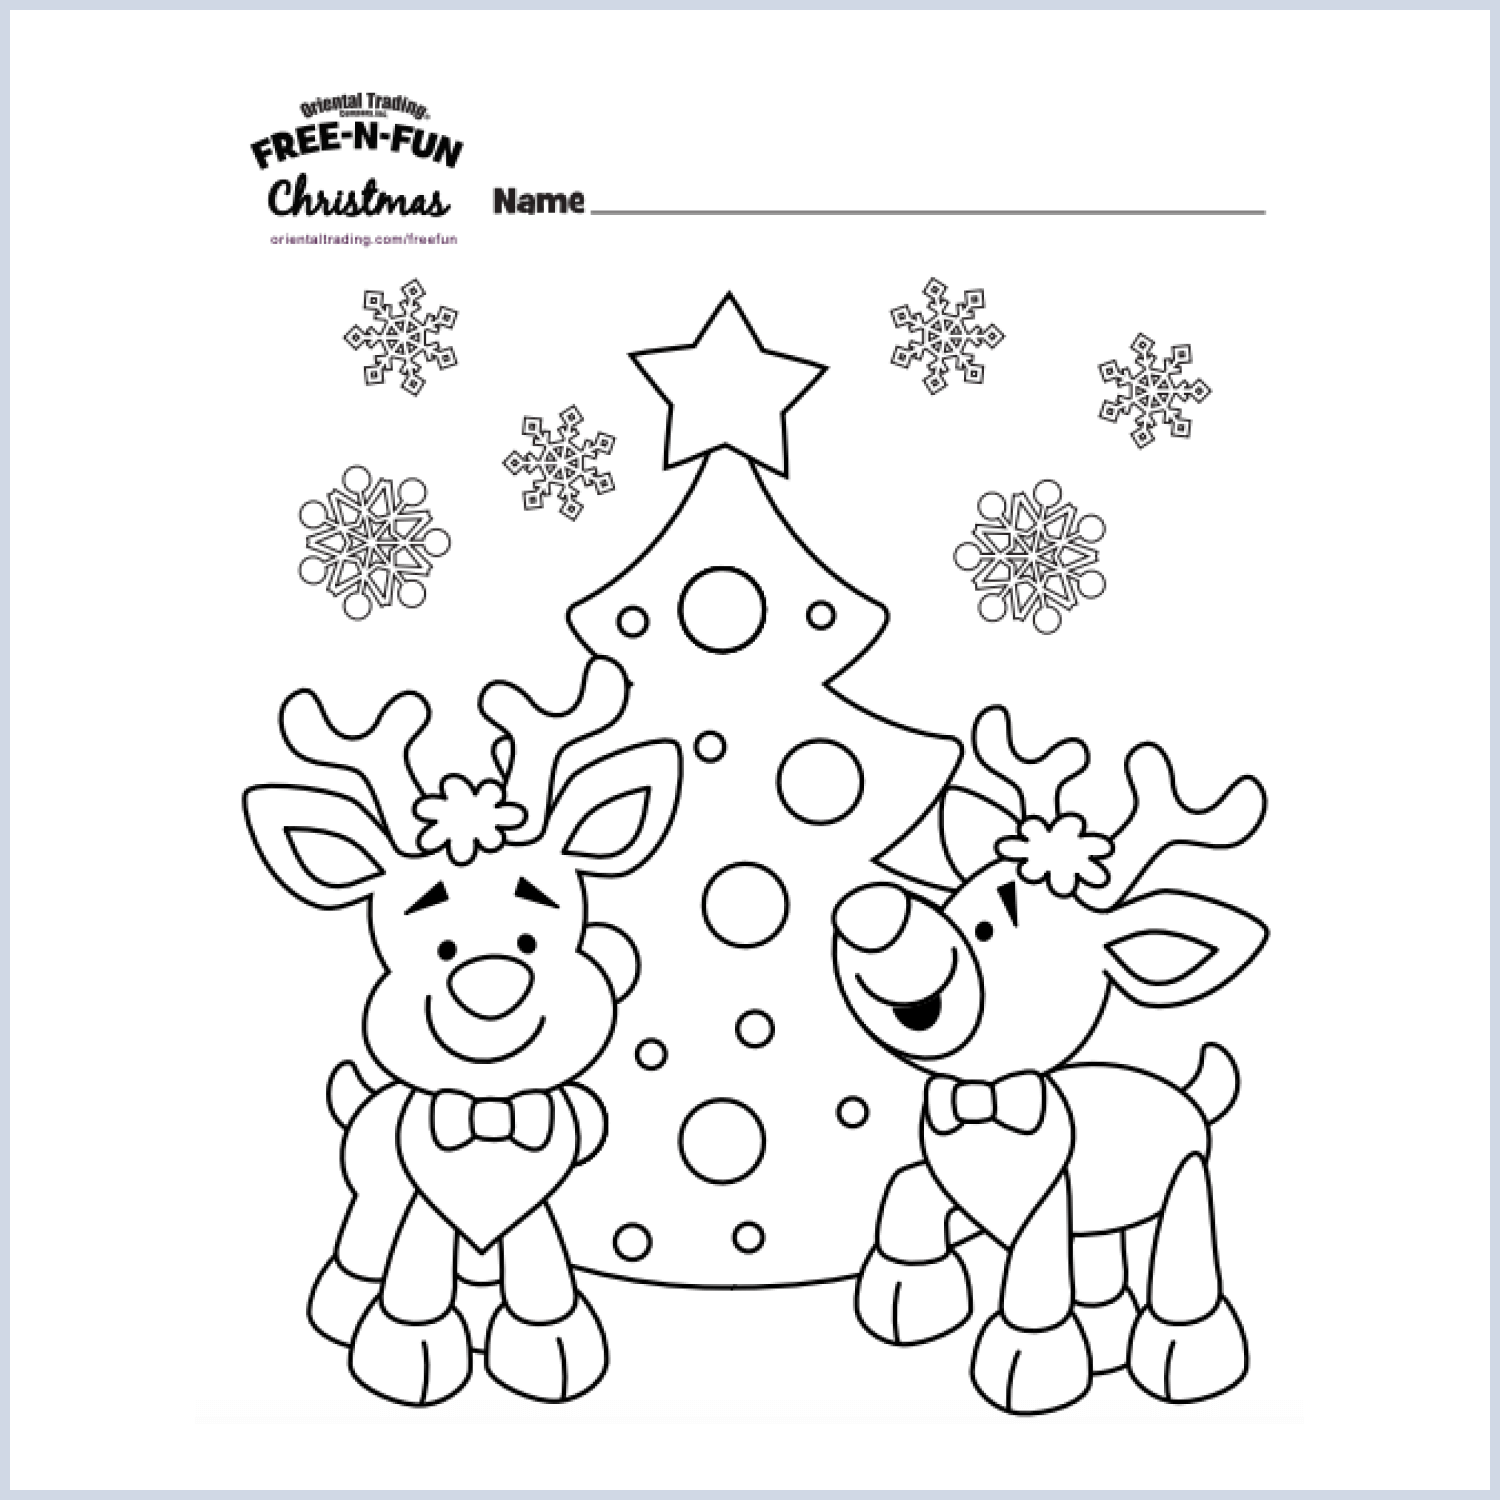 Reindeer coloring page cover image.